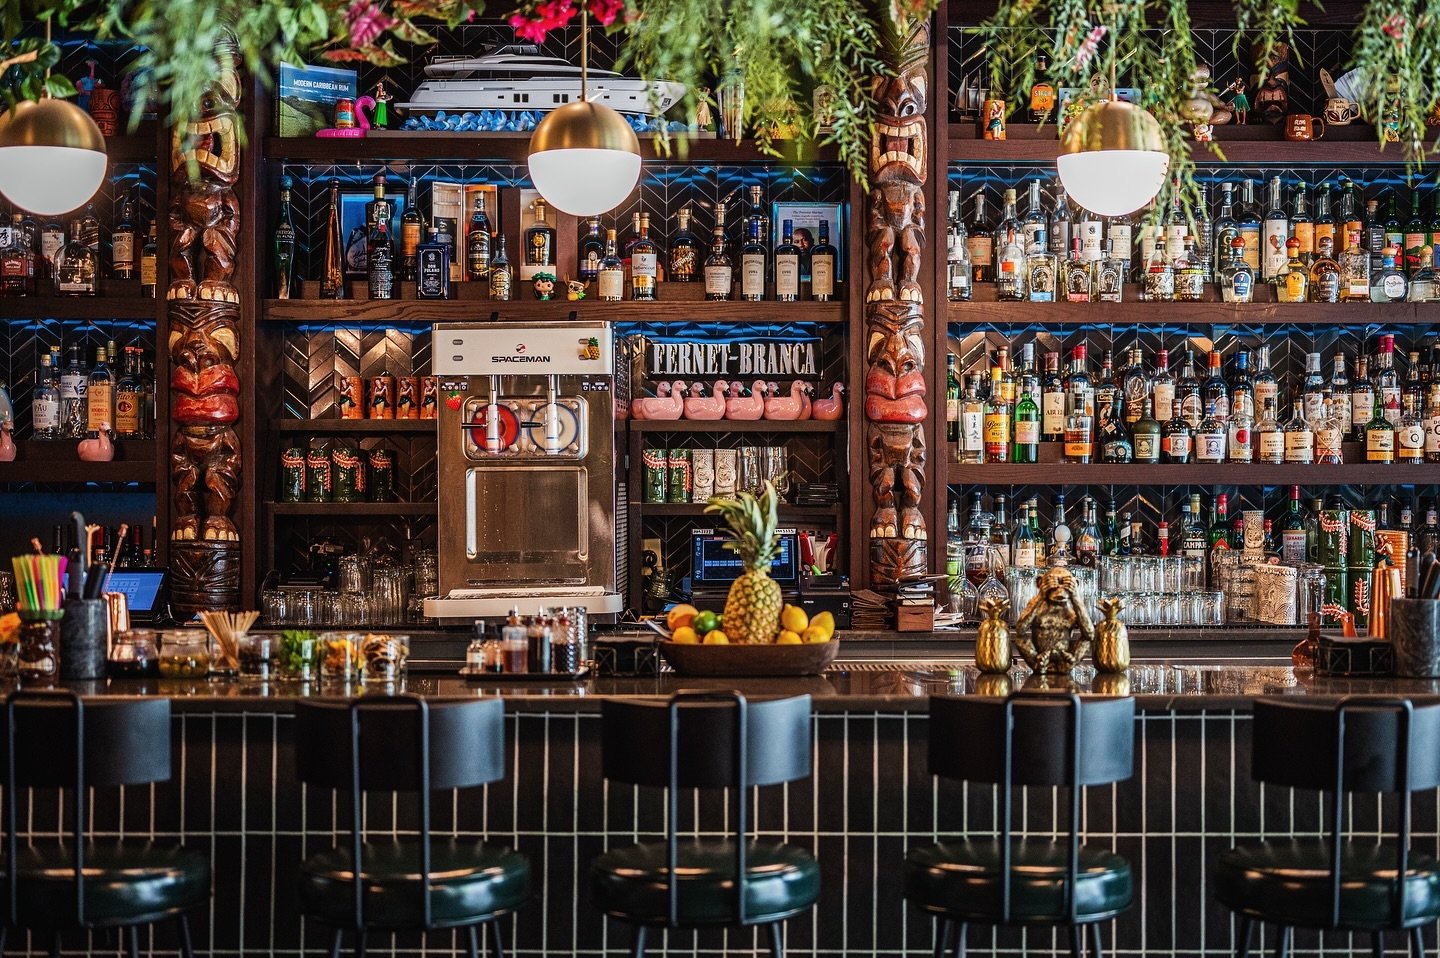 Our favorite seat in the house!... and just named one of Sarasota&rsquo;s best new restaurants by @sarasotamagazine. 
Our favorite feature at the bar might have to be the hand carved tiki totem poles from a local Florida artisan! What&rsquo;s yours?!